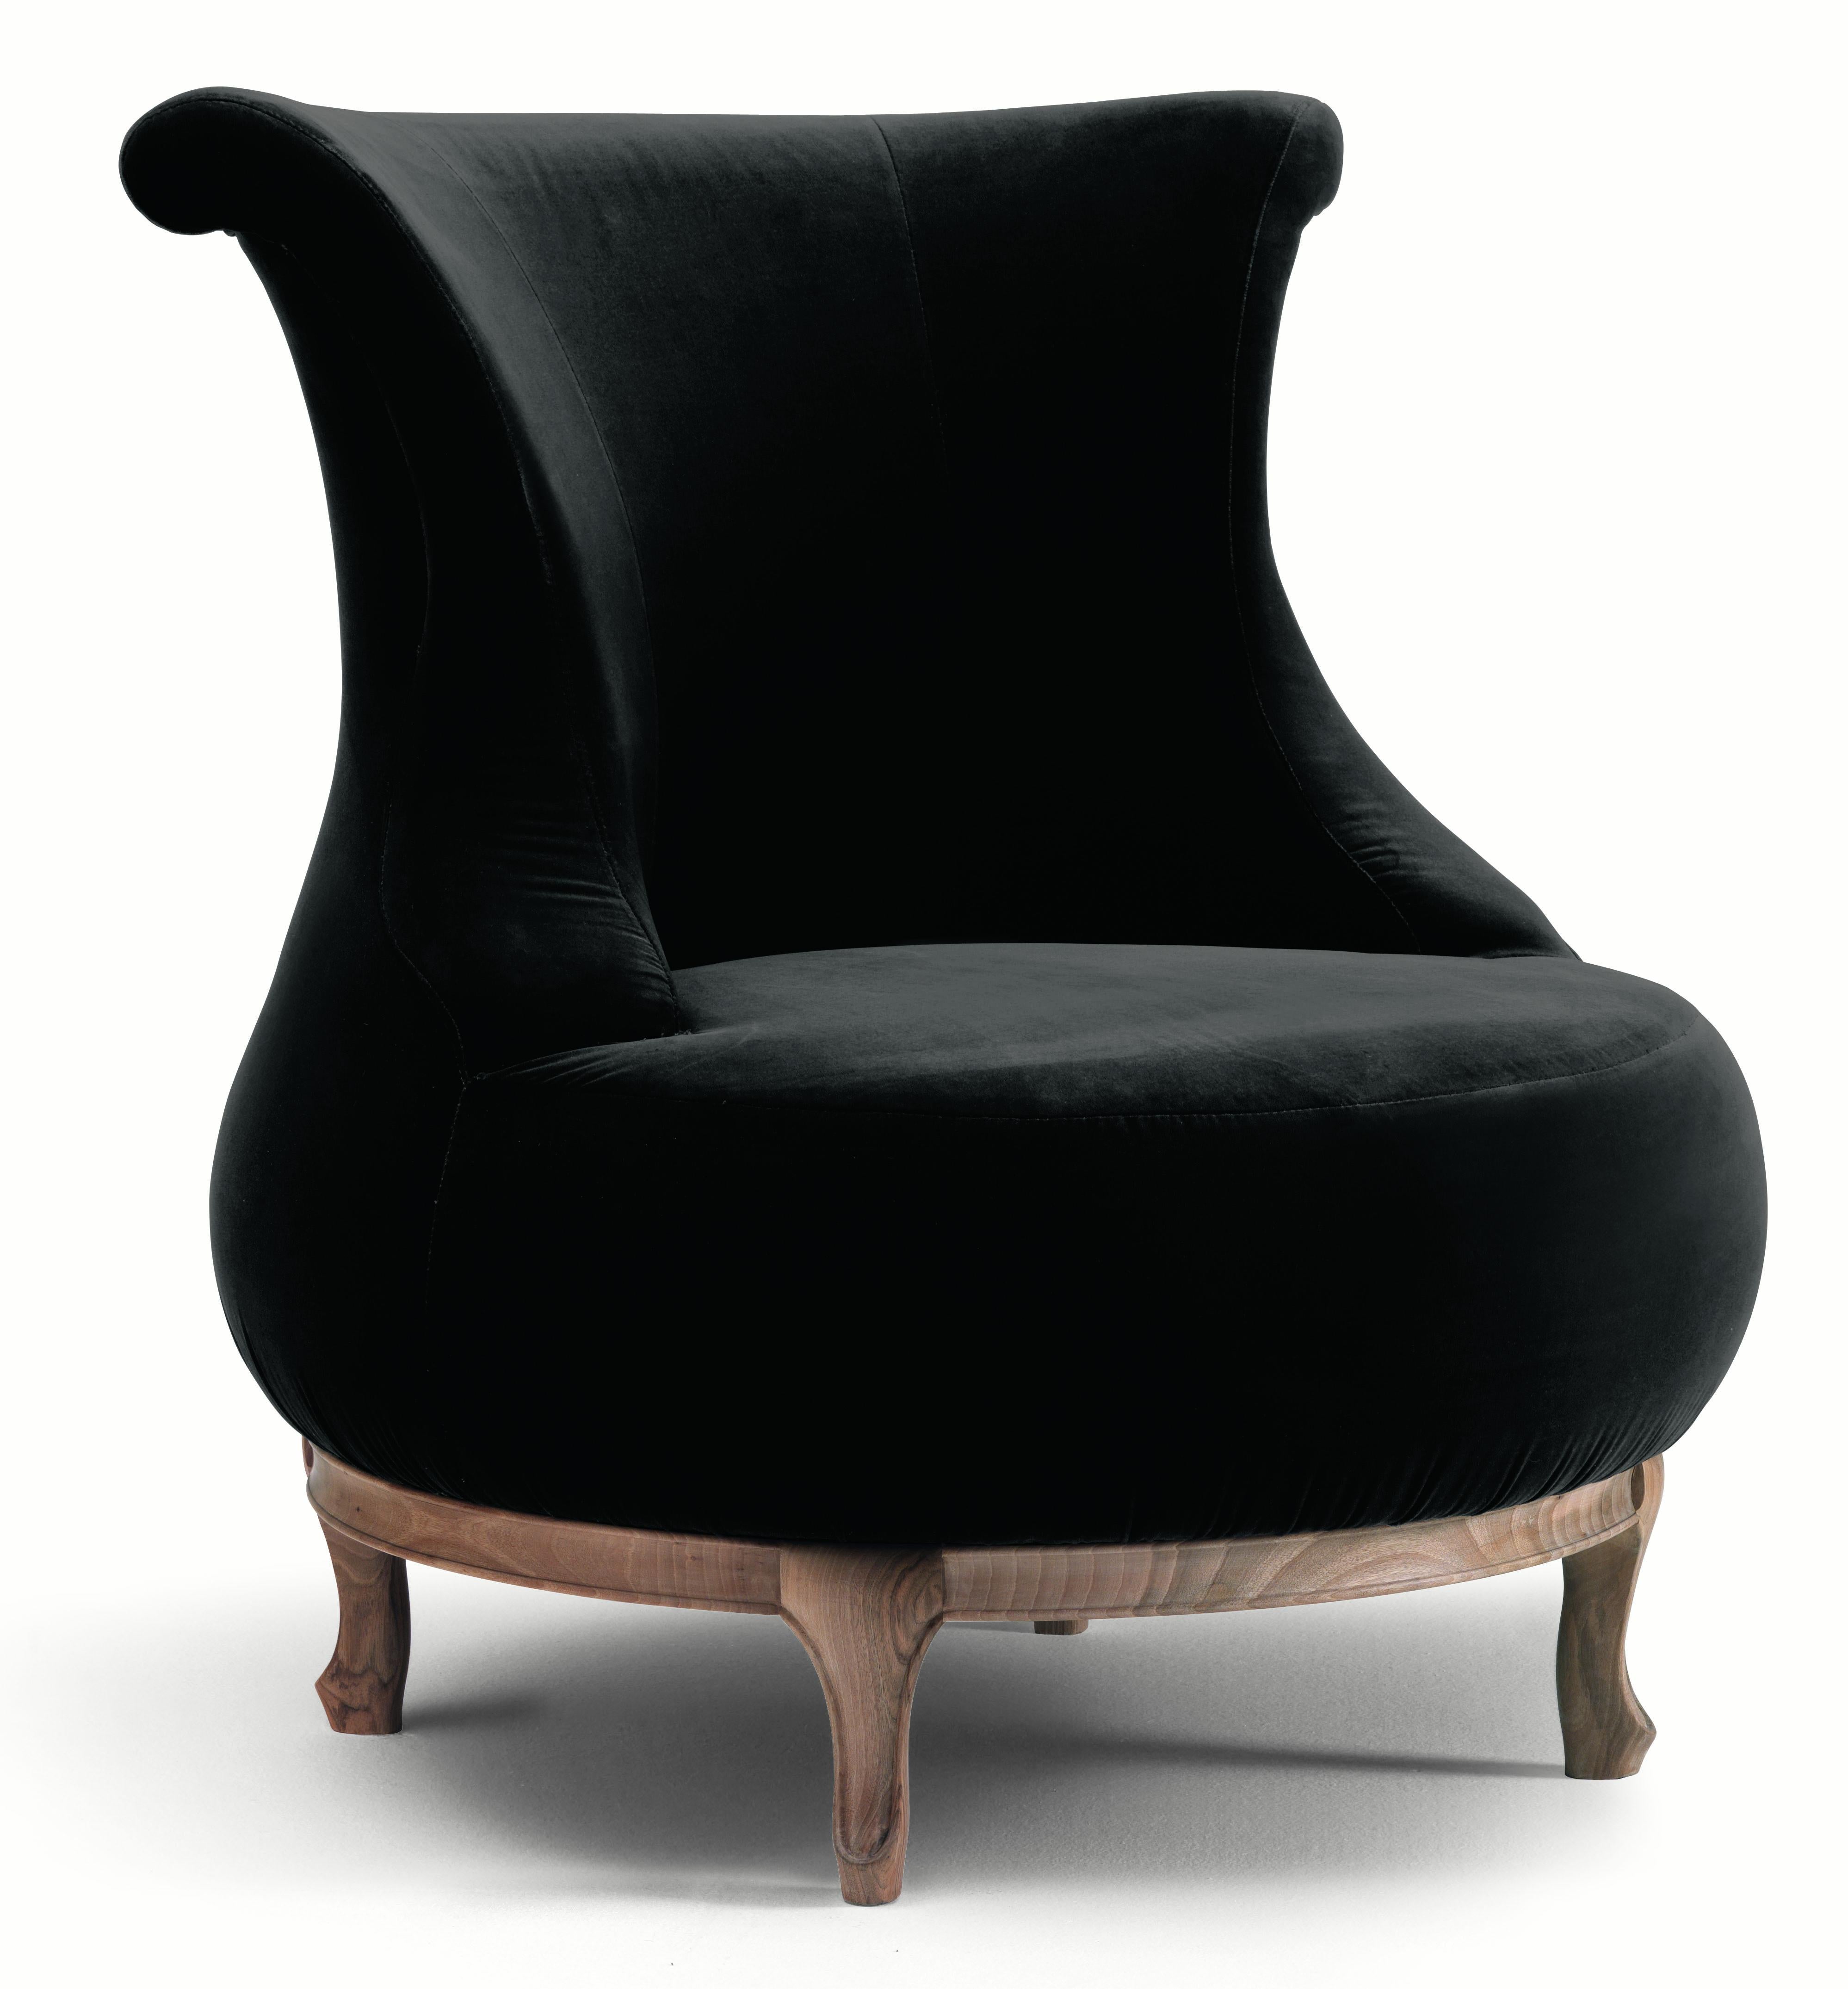 Experience the epitome of Italian craftsmanship with our exclusive collection of handcrafted treasures. Introducing the allure of anthropomorphic and rounded perfection, our artisanal armchair, a testament to exquisite design and comfort. Designed